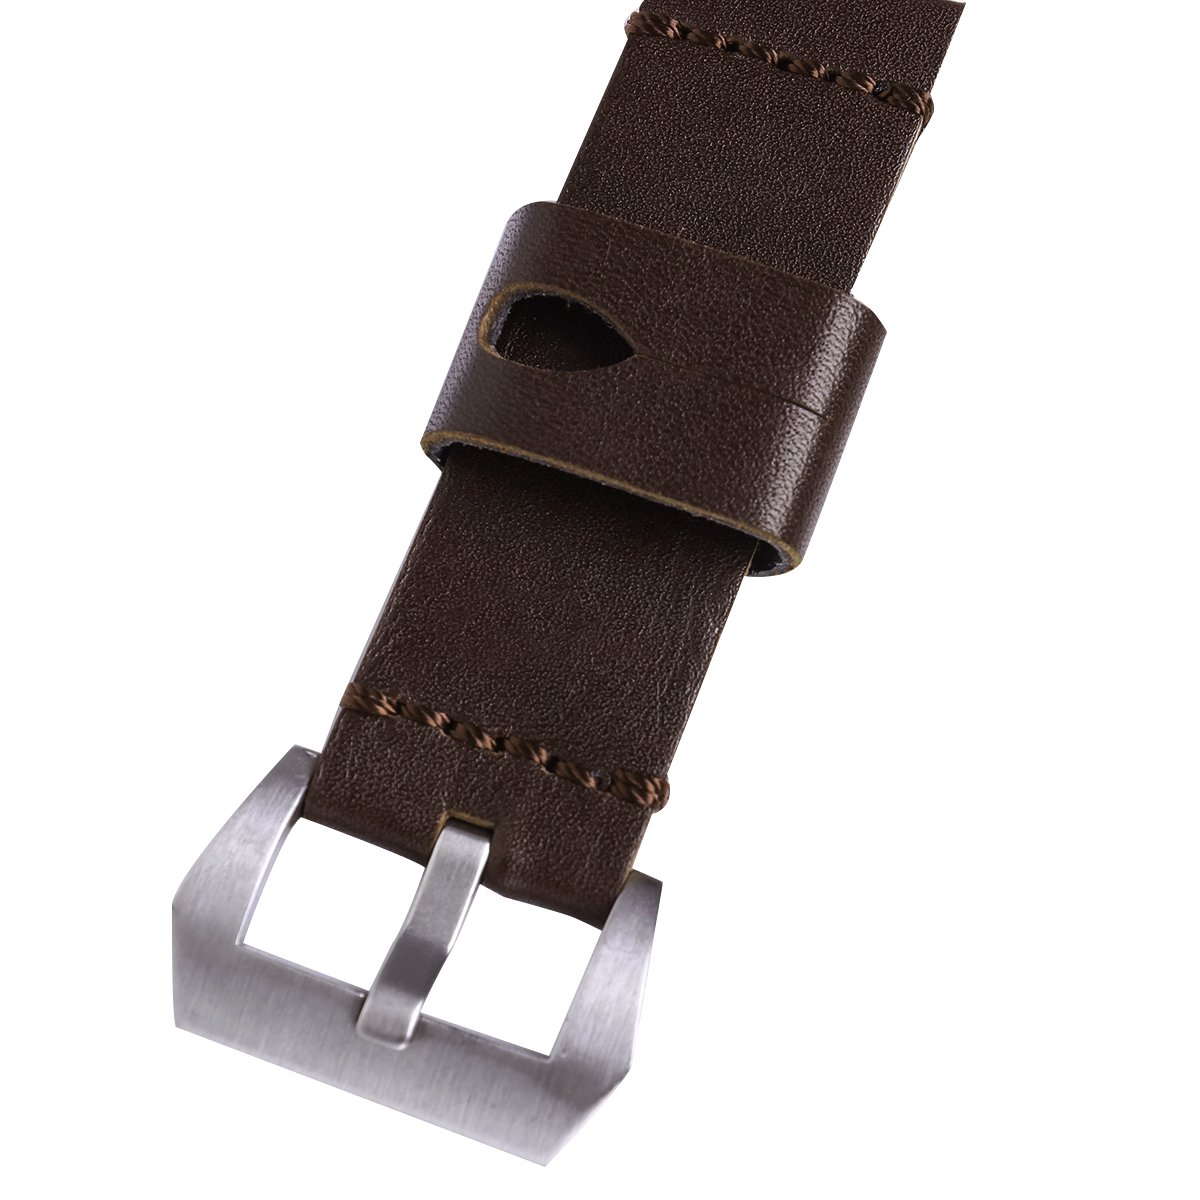 NICERIO 26mm Watch Strap Durable Calfskin Genuine Leather Watch Band Wristband for Watch Replacement (Deep Coffee with Silver Buckle)